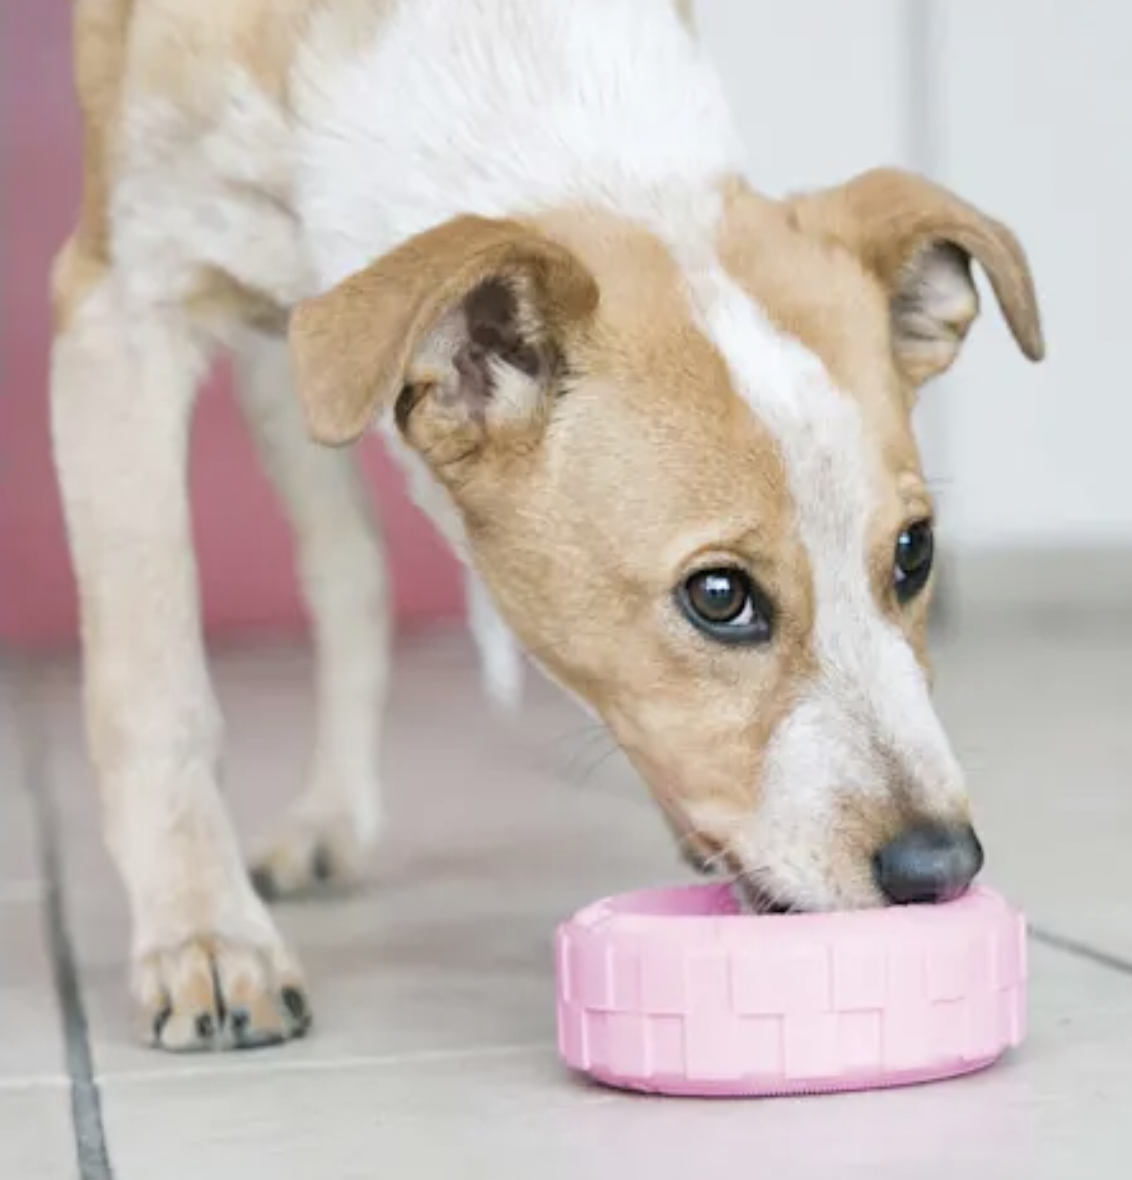 doggie nibbling on pink Kong tire toy